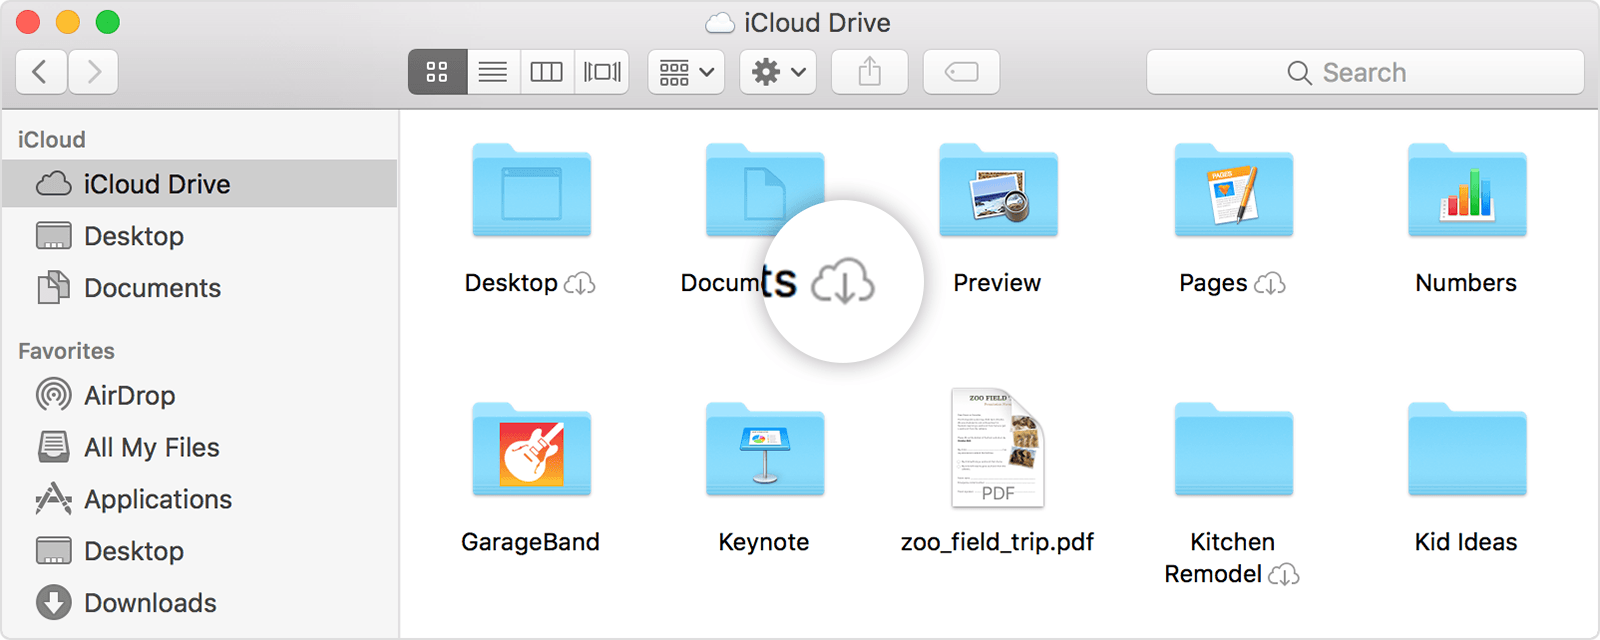 Download Icloud Drive Documents To Mac